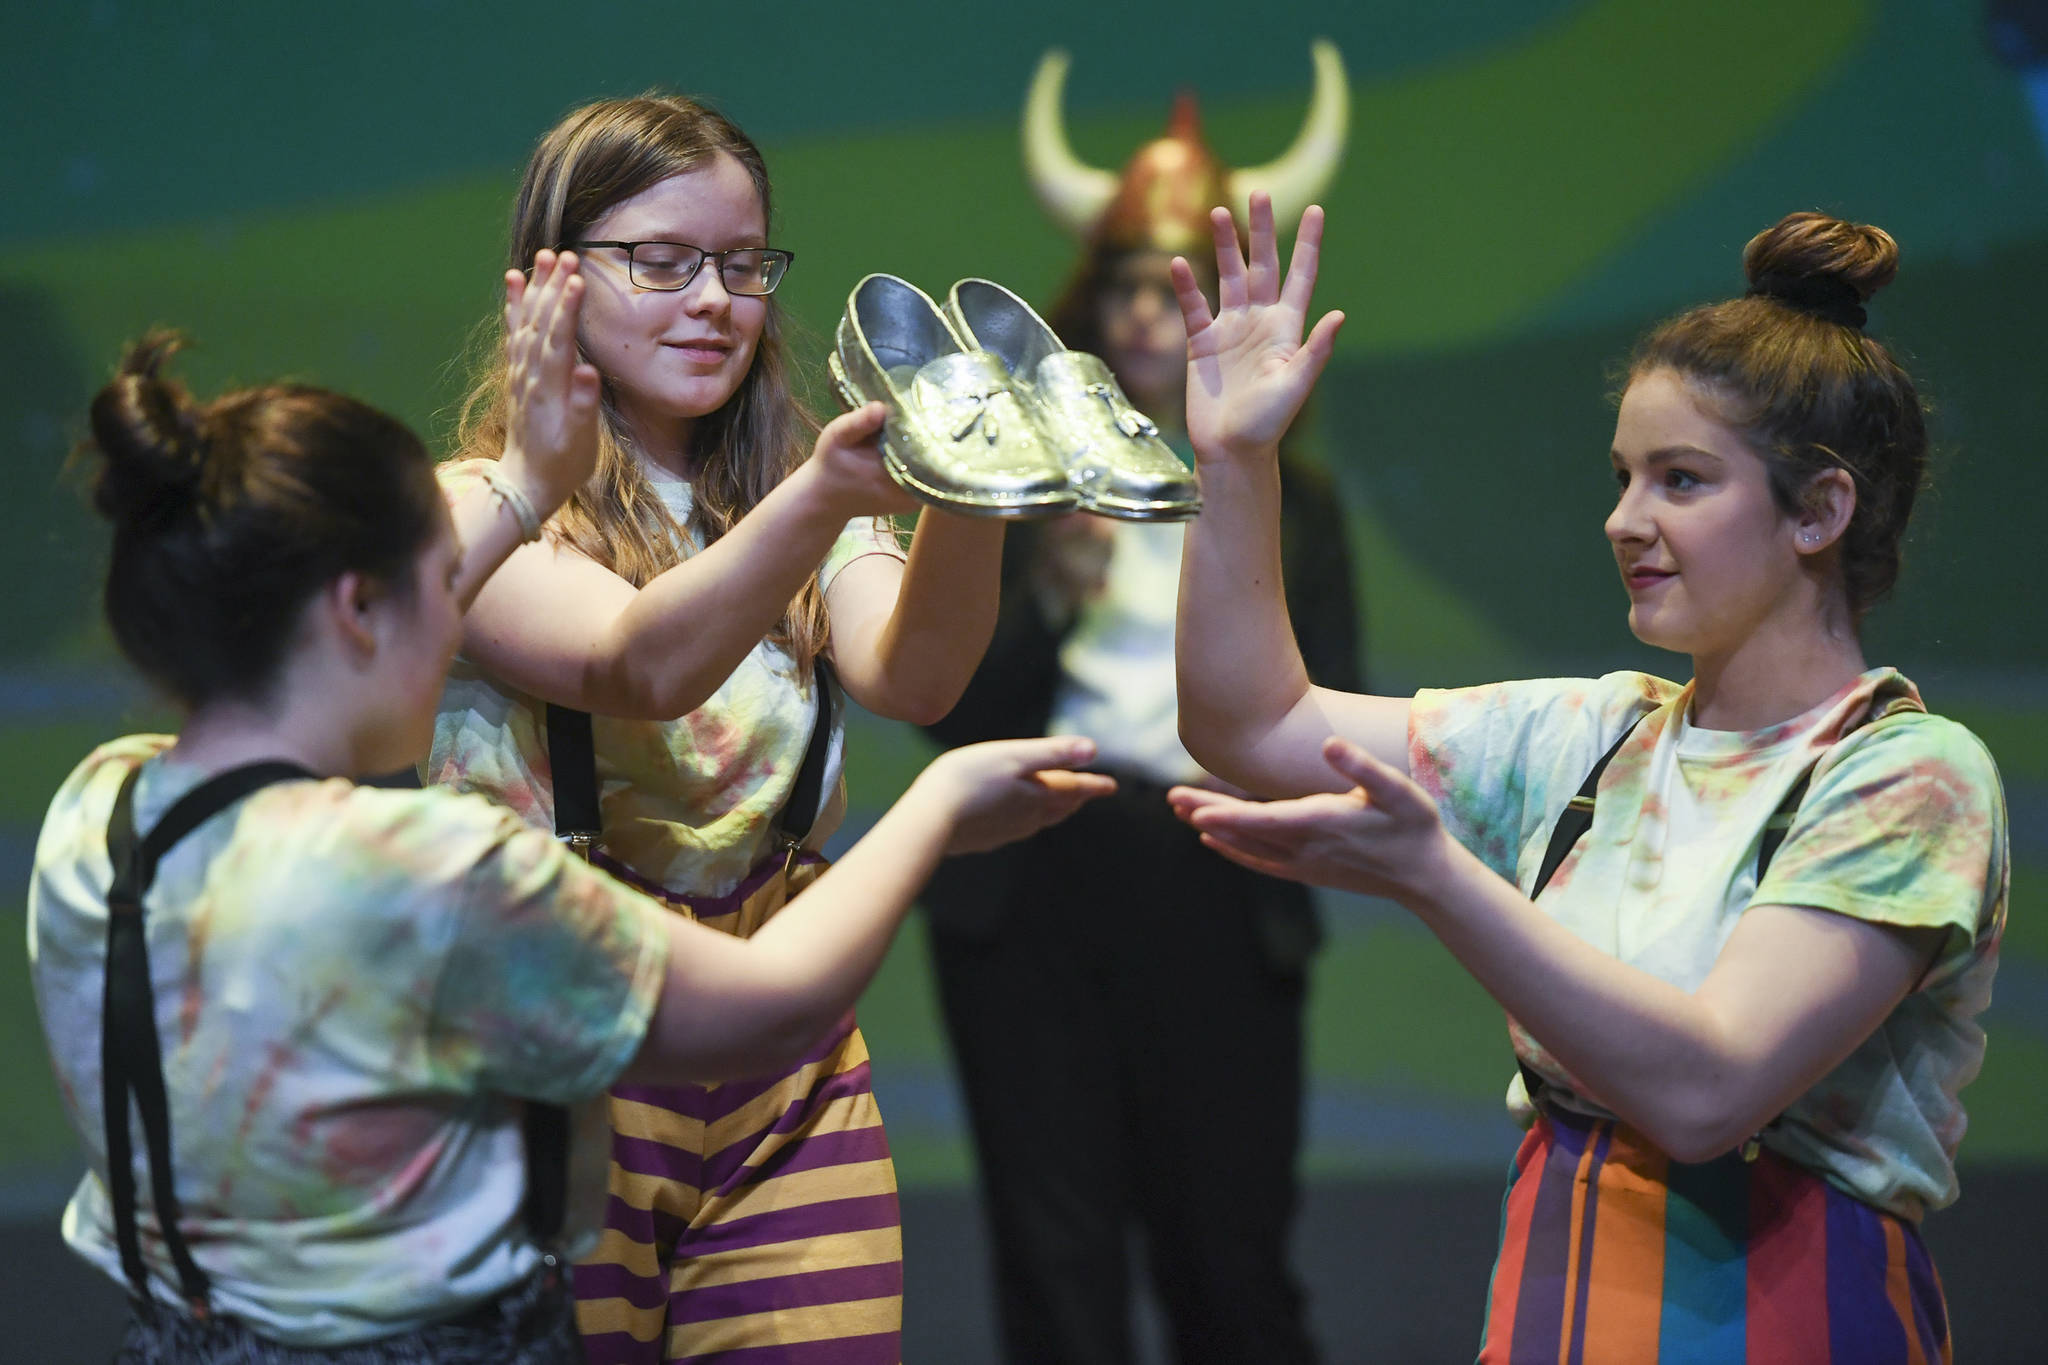 Munchkins Elena Lohrey, Caitlin Parker and River Carroll display the dead witch’s shoes during rehearsal for the Thunder Mountain High School production of “Choose Your Own Oz” at TMHS on Friday, Nov. 8, 2019. (Michael Penn | Juneau Empire)